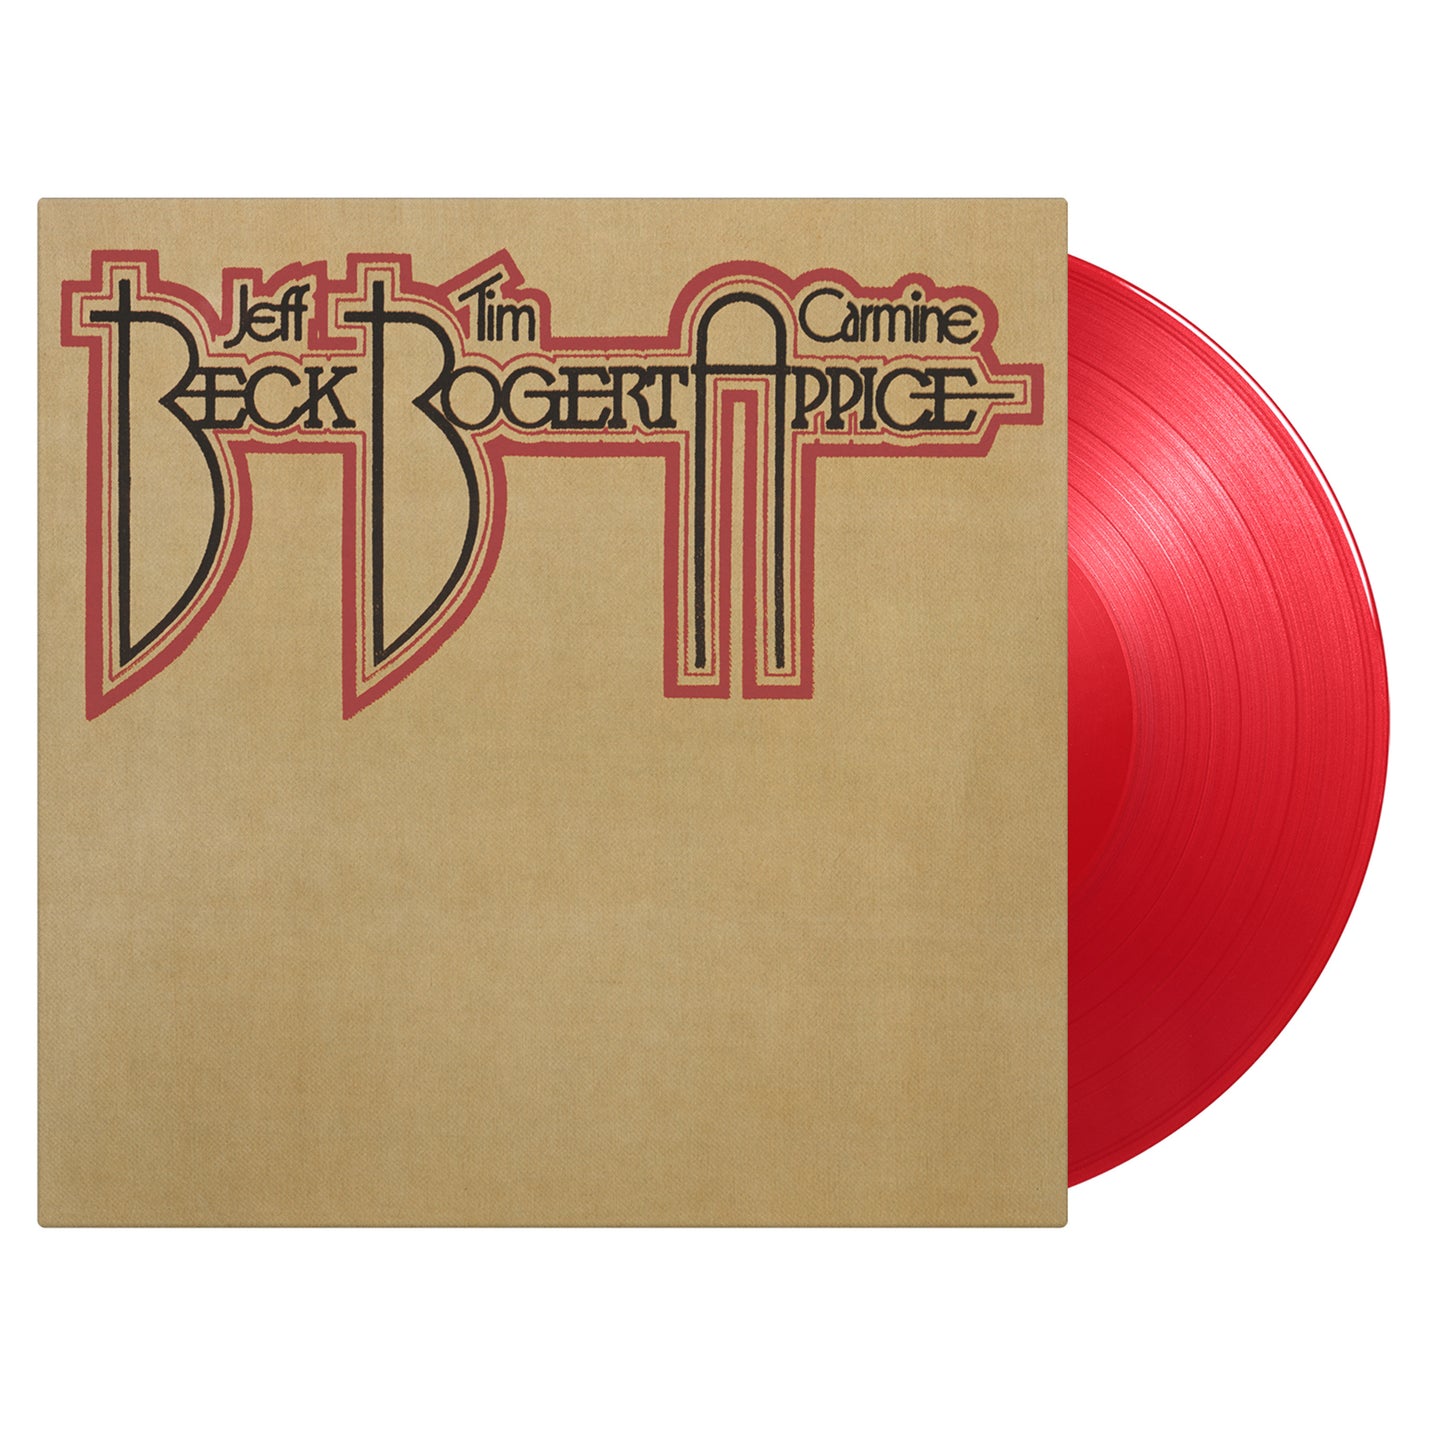 BECK, BOGERT & APPICE 50TH ANNIVERSARY EDTION (TRANSLUCENT RED COLOURED) VINYL